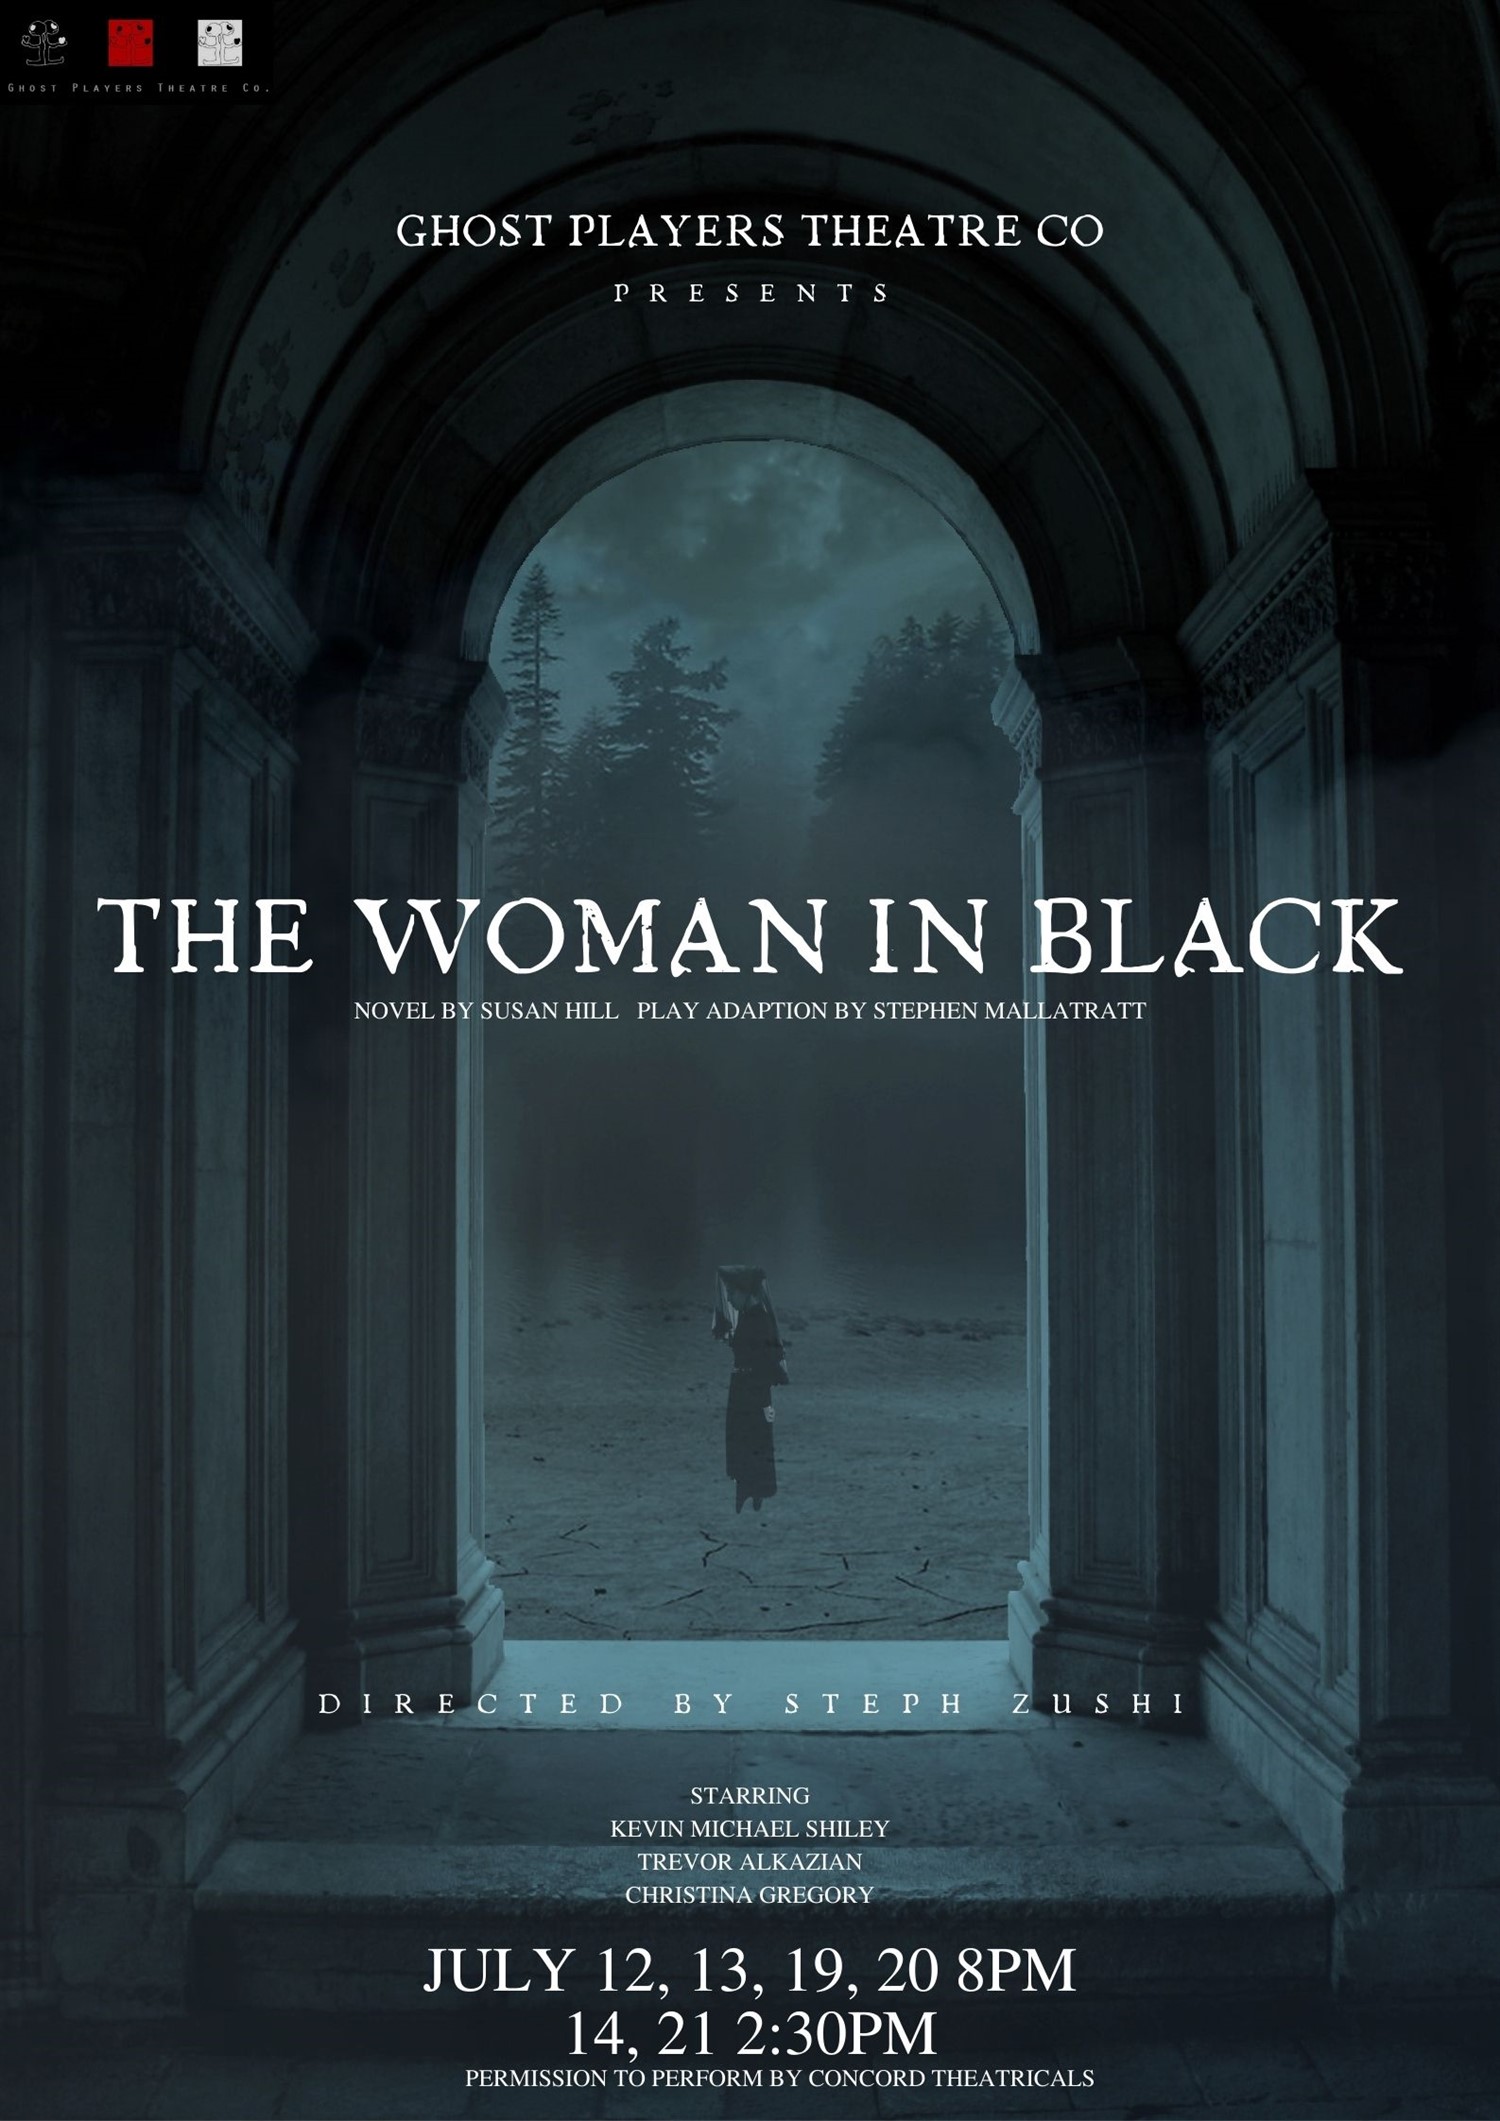 THE WOMAN IN BLACK Presented by Ghost Players Theatre Co. on Jul 23, 00:00@Alemany Theater - Pick a seat, Buy tickets and Get information on GHOST PLAYERS THEATRE CO 